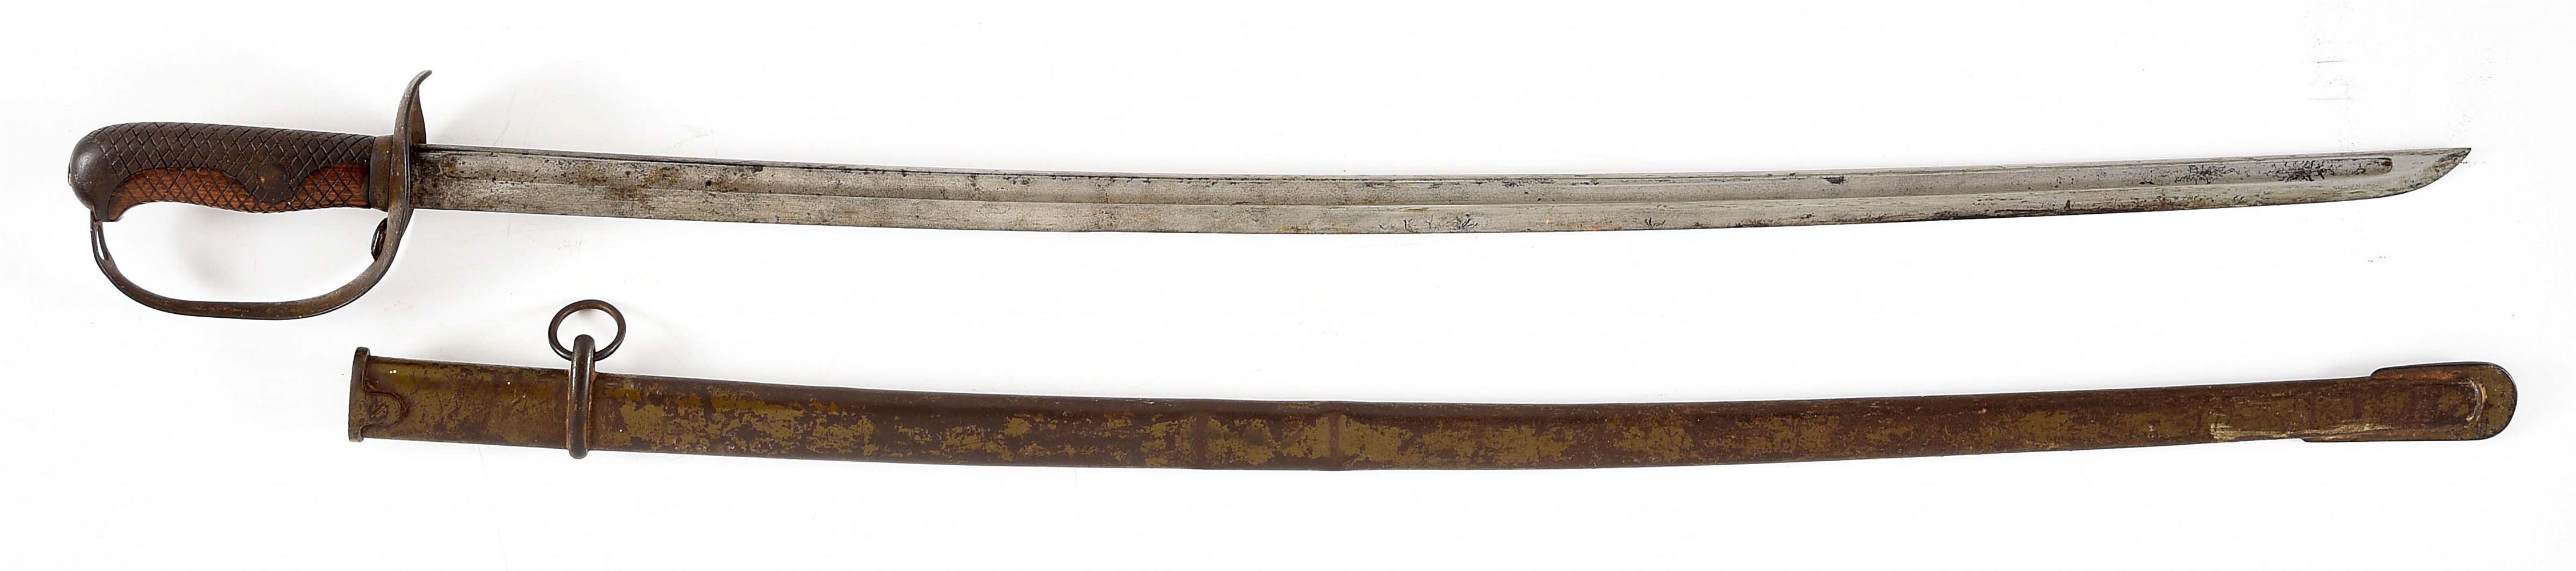 IMPERIAL JAPANESE M1899 TYPE 32 FIRST PATTERN "KO" CAVALRY SABER.